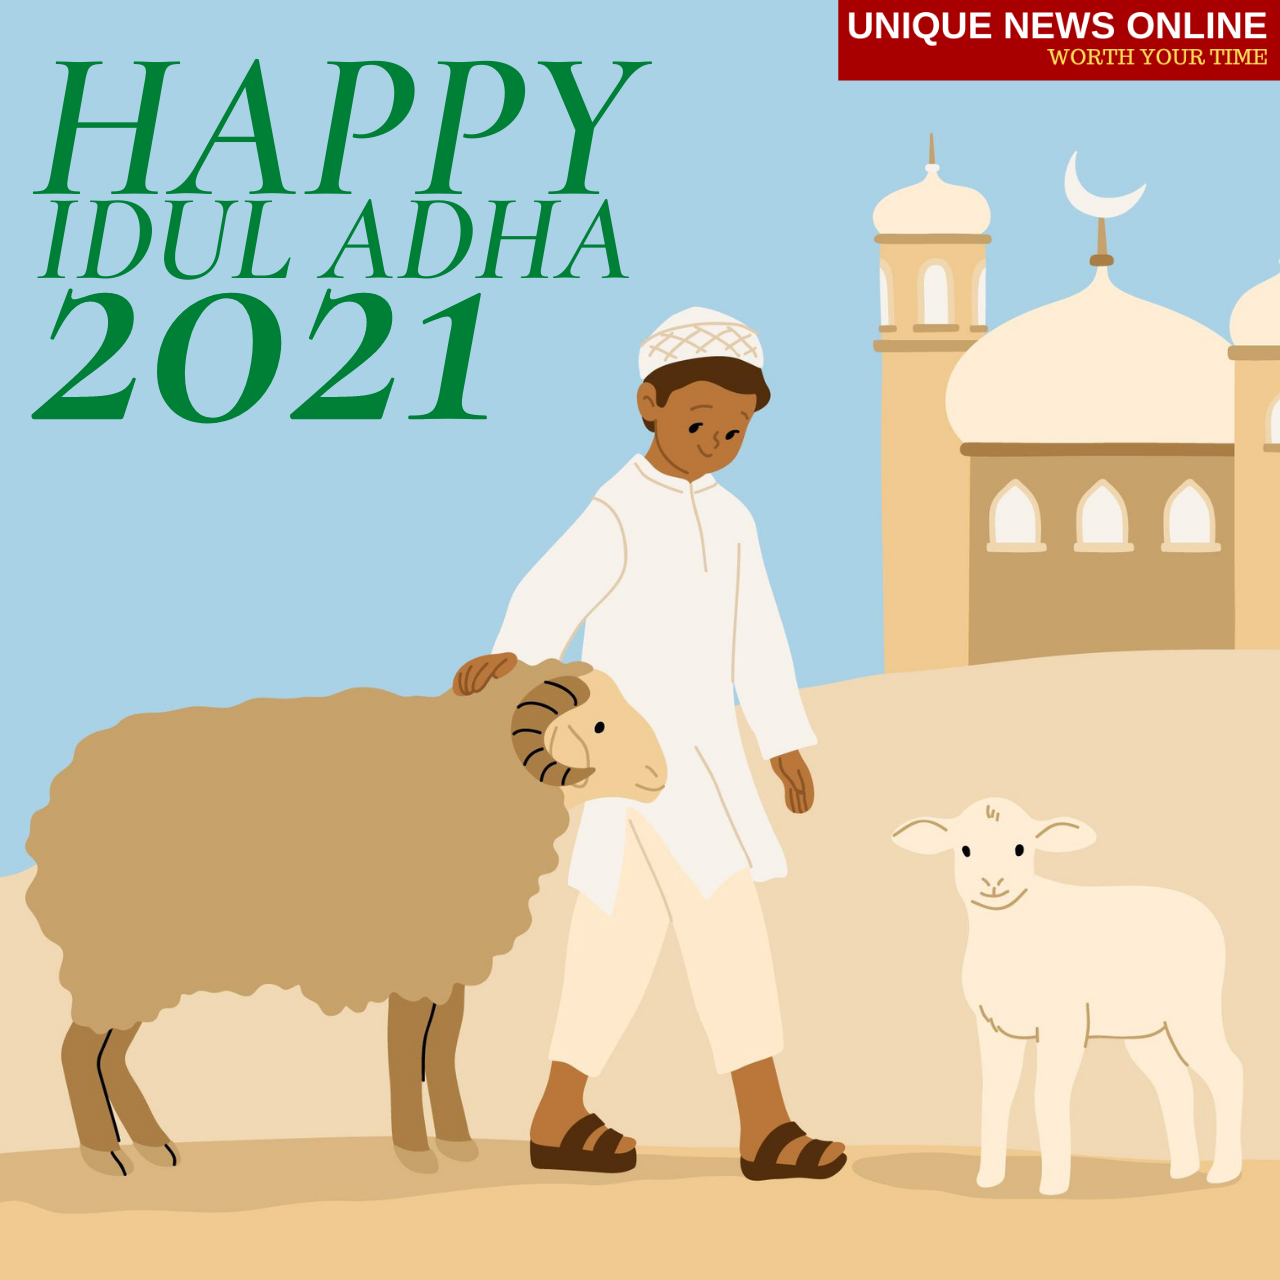 Idul Adha 2021 Indonesian Wishes, Status, Messages, Greetings, Quotes, and Images to greet your Loved Ones